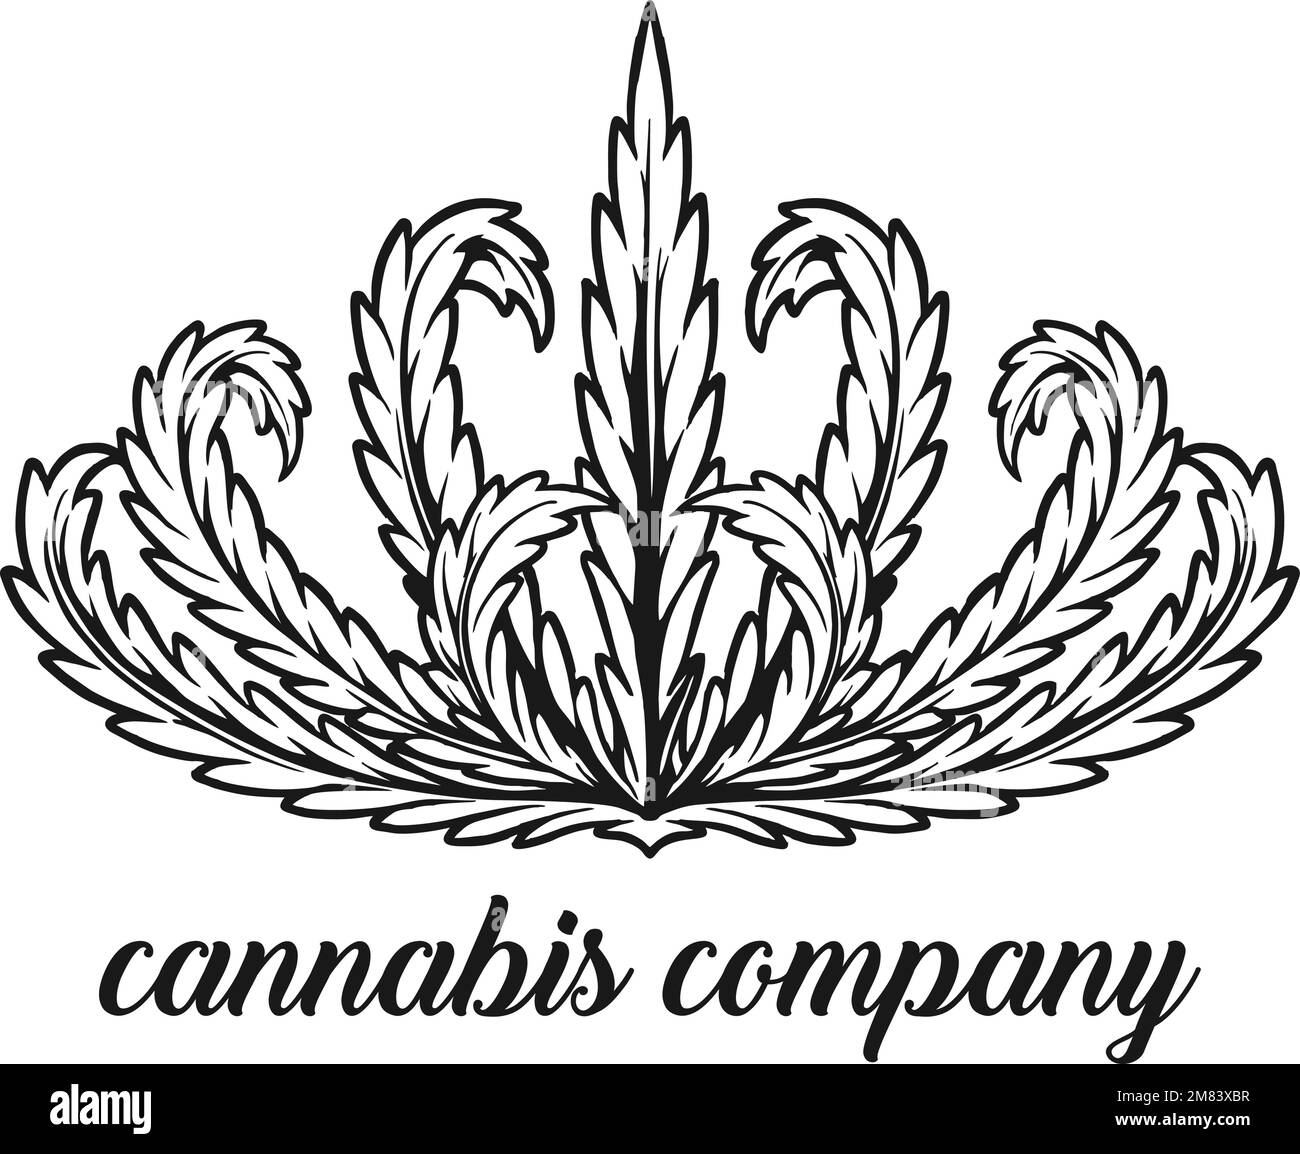 Classic weed crown leaf company mascot monochrome vector illustrations for your work logo, merchandise t-shirt, stickers and label designs, poster Stock Vector